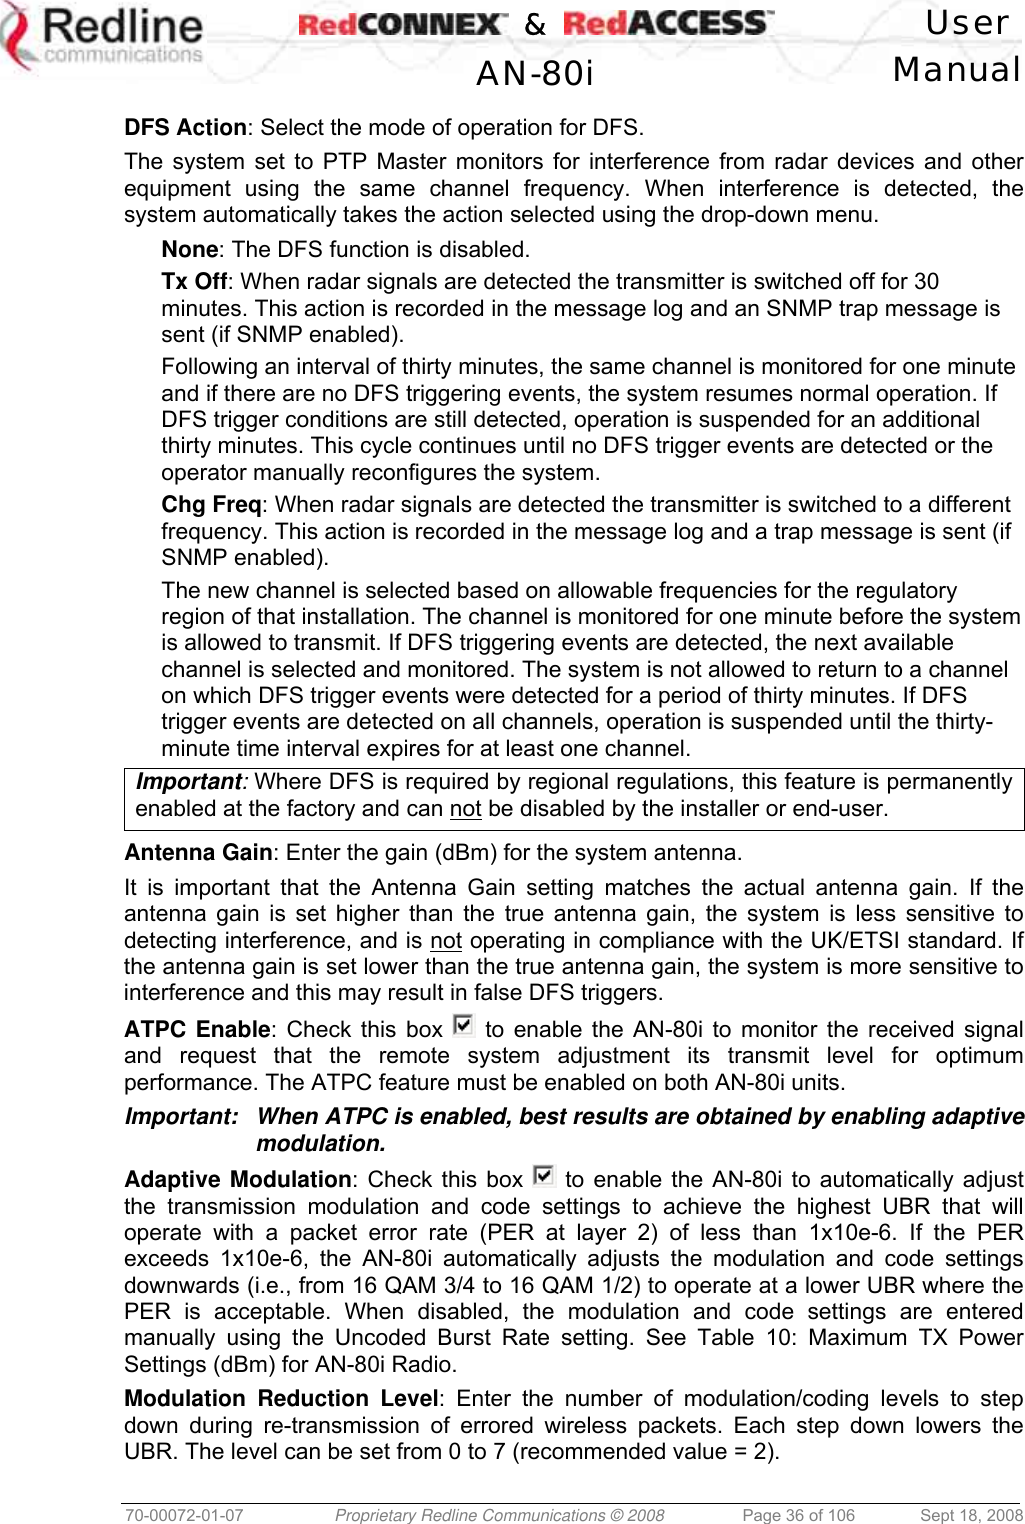    &amp;  User  AN-80i Manual  70-00072-01-07  Proprietary Redline Communications © 2008  Page 36 of 106  Sept 18, 2008  DFS Action: Select the mode of operation for DFS. The system set to PTP Master monitors for interference from radar devices and other equipment using the same channel frequency. When interference is detected, the system automatically takes the action selected using the drop-down menu. None: The DFS function is disabled. Tx Off: When radar signals are detected the transmitter is switched off for 30 minutes. This action is recorded in the message log and an SNMP trap message is sent (if SNMP enabled). Following an interval of thirty minutes, the same channel is monitored for one minute and if there are no DFS triggering events, the system resumes normal operation. If DFS trigger conditions are still detected, operation is suspended for an additional thirty minutes. This cycle continues until no DFS trigger events are detected or the operator manually reconfigures the system. Chg Freq: When radar signals are detected the transmitter is switched to a different frequency. This action is recorded in the message log and a trap message is sent (if SNMP enabled). The new channel is selected based on allowable frequencies for the regulatory region of that installation. The channel is monitored for one minute before the system is allowed to transmit. If DFS triggering events are detected, the next available channel is selected and monitored. The system is not allowed to return to a channel on which DFS trigger events were detected for a period of thirty minutes. If DFS trigger events are detected on all channels, operation is suspended until the thirty-minute time interval expires for at least one channel. Important: Where DFS is required by regional regulations, this feature is permanently enabled at the factory and can not be disabled by the installer or end-user.  Antenna Gain: Enter the gain (dBm) for the system antenna.  It is important that the Antenna Gain setting matches the actual antenna gain. If the antenna gain is set higher than the true antenna gain, the system is less sensitive to detecting interference, and is not operating in compliance with the UK/ETSI standard. If the antenna gain is set lower than the true antenna gain, the system is more sensitive to interference and this may result in false DFS triggers. ATPC Enable: Check this box   to enable the AN-80i to monitor the received signal and request that the remote system adjustment its transmit level for optimum performance. The ATPC feature must be enabled on both AN-80i units. Important:  When ATPC is enabled, best results are obtained by enabling adaptive modulation. Adaptive Modulation: Check this box   to enable the AN-80i to automatically adjust the transmission modulation and code settings to achieve the highest UBR that will operate with a packet error rate (PER at layer 2) of less than 1x10e-6. If the PER exceeds 1x10e-6, the AN-80i automatically adjusts the modulation and code settings downwards (i.e., from 16 QAM 3/4 to 16 QAM 1/2) to operate at a lower UBR where the PER is acceptable. When disabled, the modulation and code settings are entered manually using the Uncoded Burst Rate setting. See Table 10: Maximum TX Power Settings (dBm) for AN-80i Radio. Modulation Reduction Level: Enter the number of modulation/coding levels to step down during re-transmission of errored wireless packets. Each step down lowers the UBR. The level can be set from 0 to 7 (recommended value = 2). 